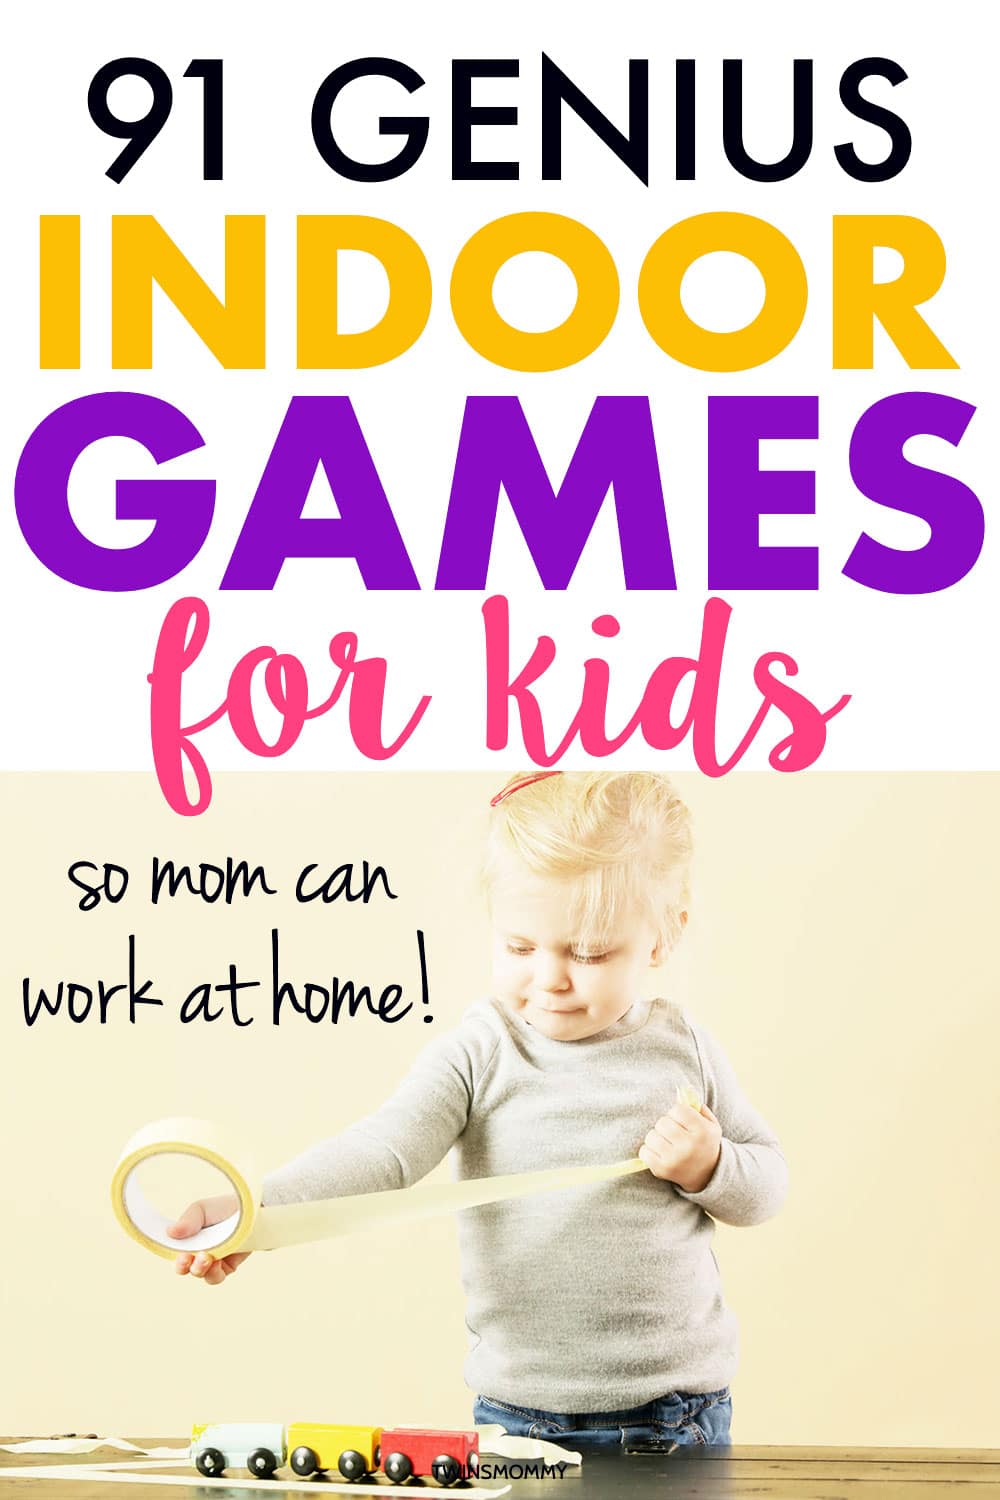 21 Simple and Fun Games to Play with Kids - Empowered Parents